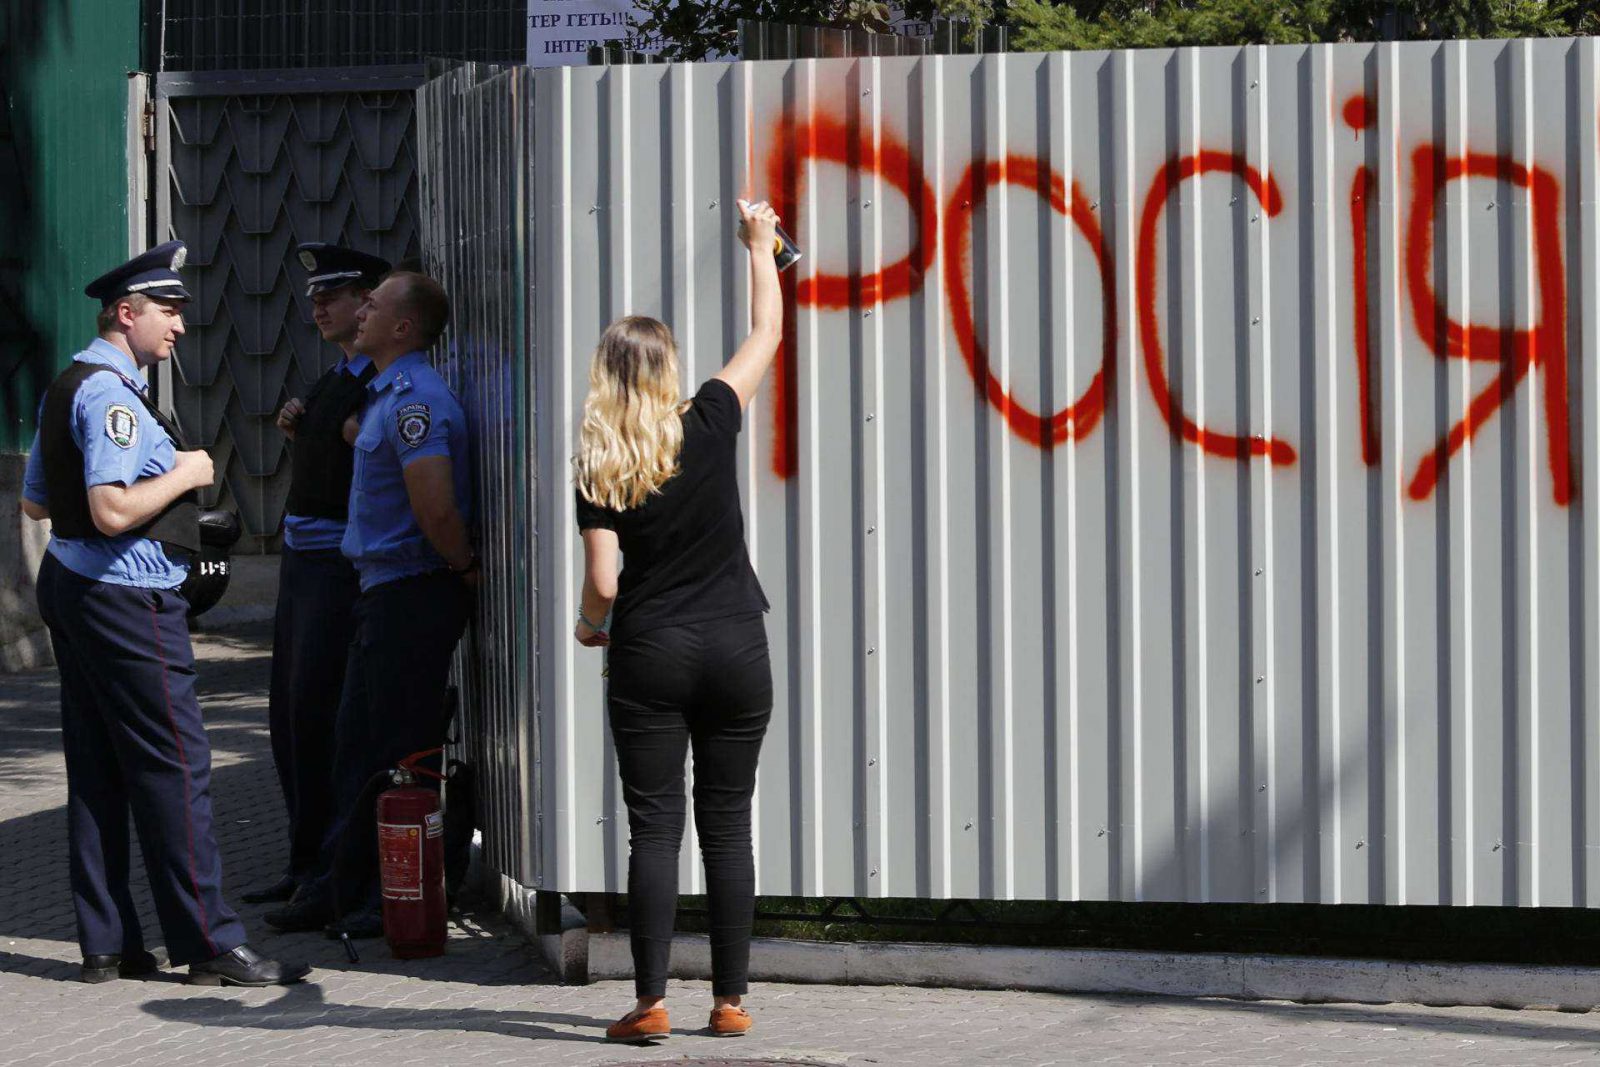 Police stand guard as an activist sprays the word 'Russia' on the barrier around Ukrainian television channel "Inter," which protesters say has an anti-Ukrainian stance, in Kyiv, Ukraine September 5, 2016. photo by Maxym Marusenko *** Please Use Credit from Credit Field ***